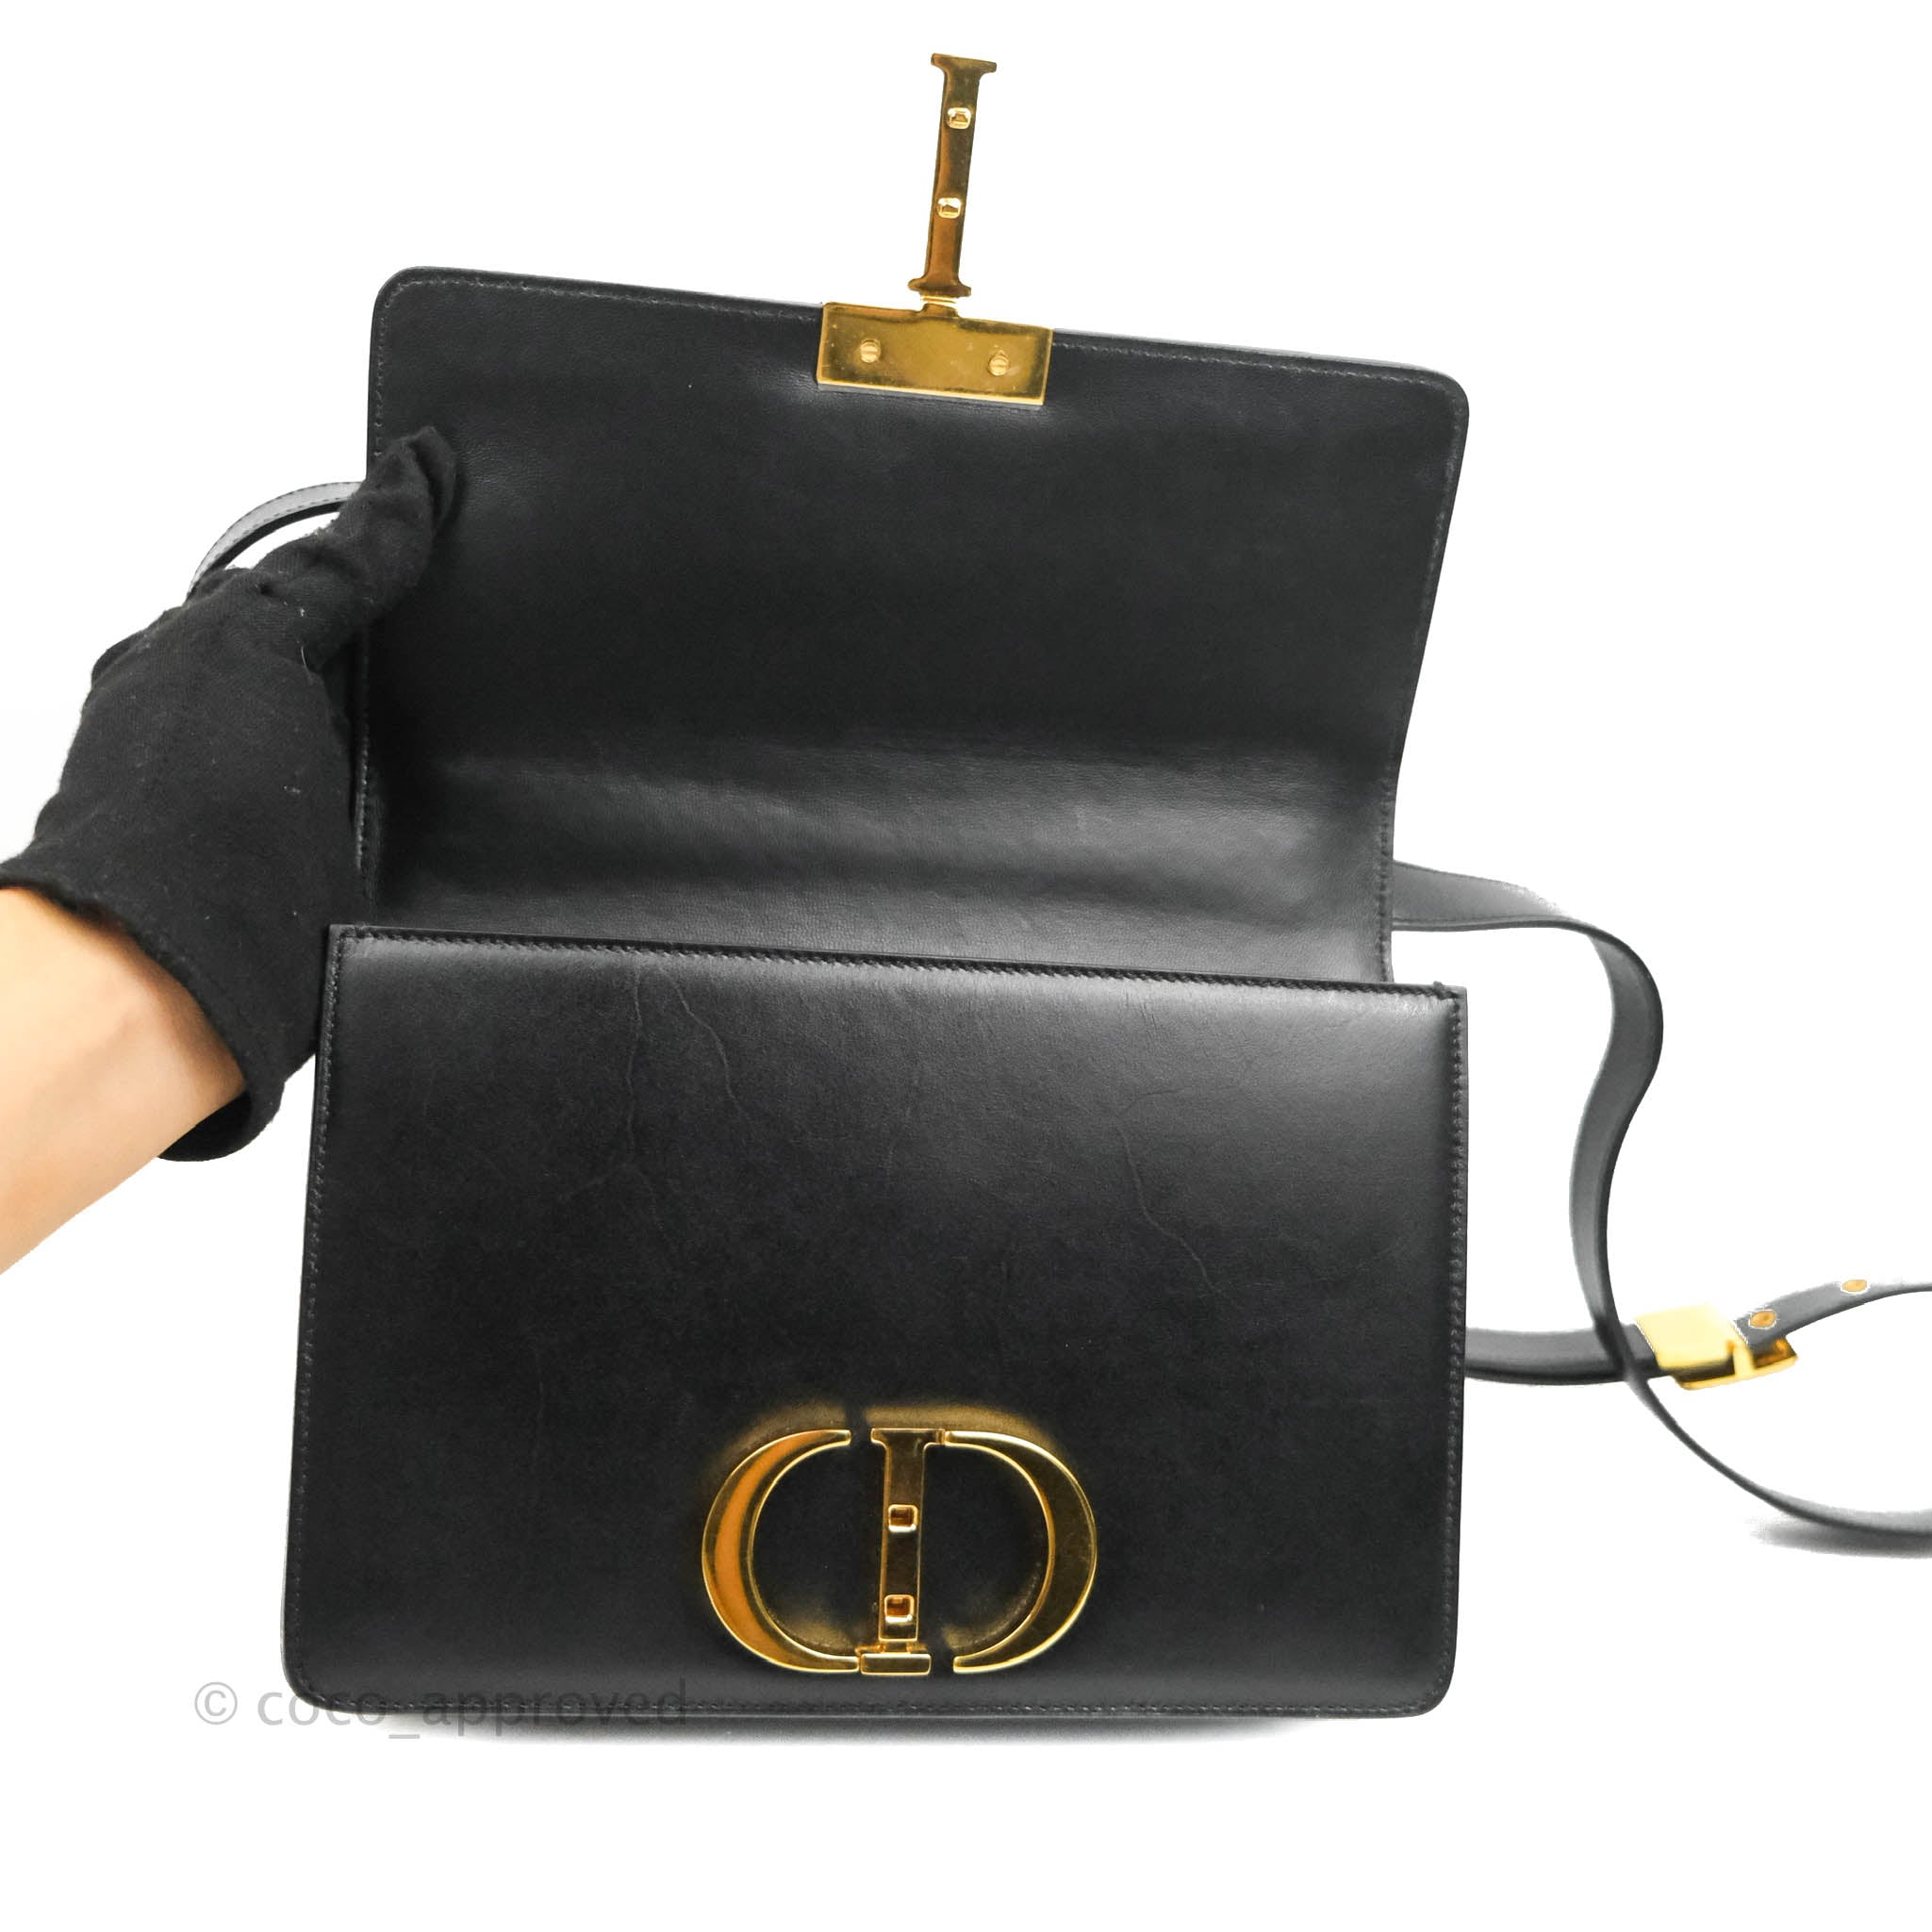 Dior 30 Montaigne Bag Black Calfskin Gold Hardware – Coco Approved